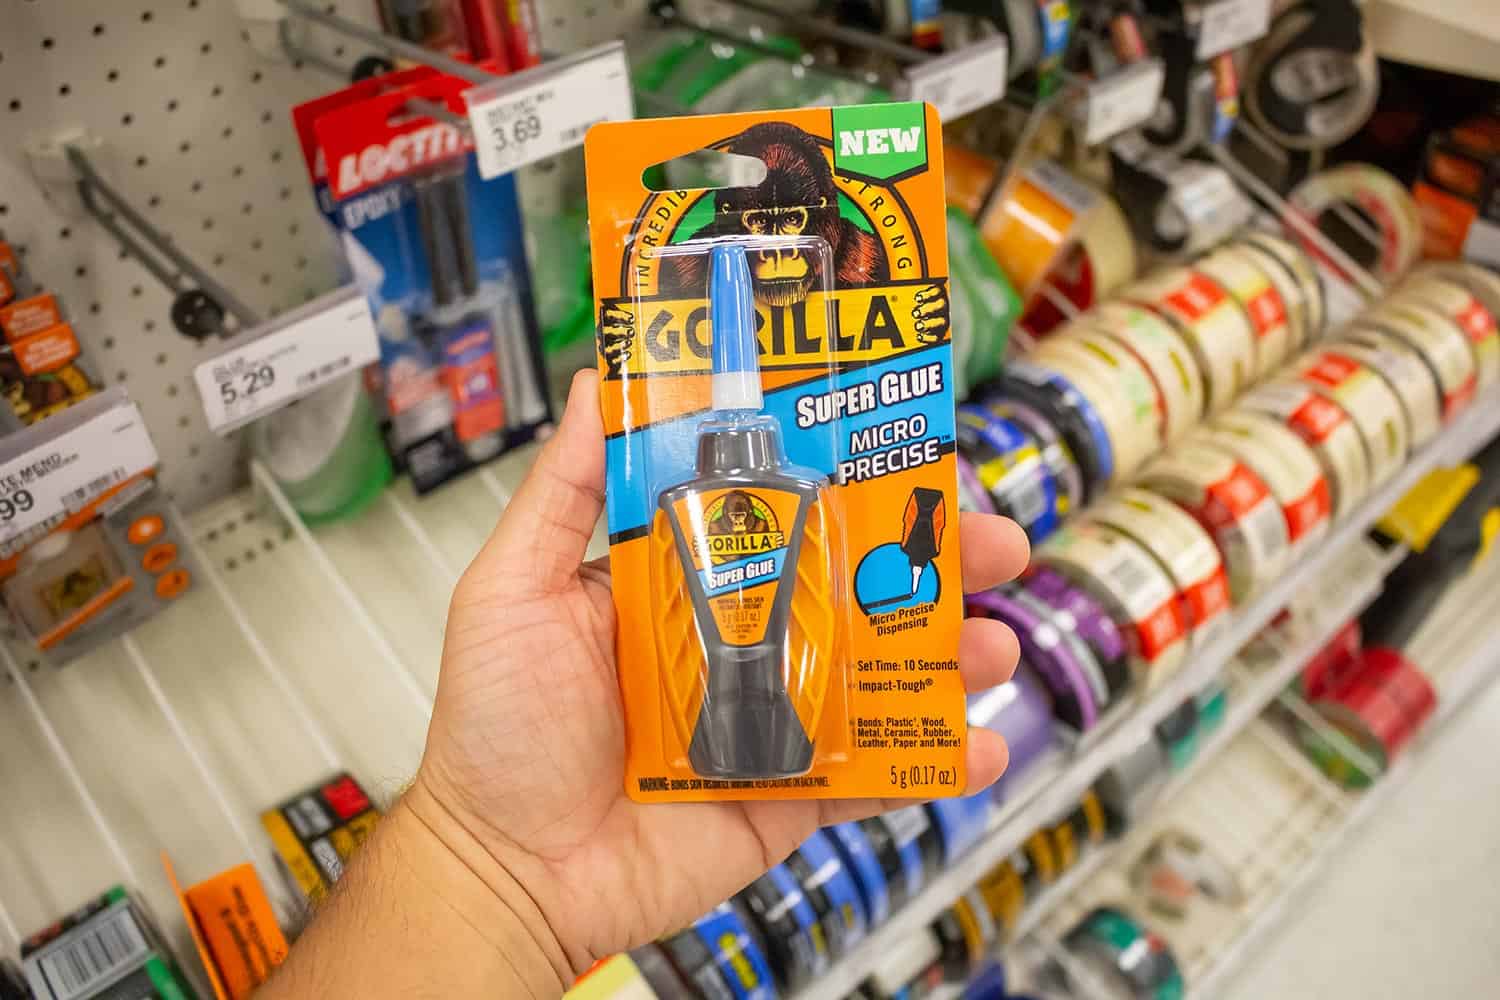  A hand holds a package of Gorilla super glue at a local department store